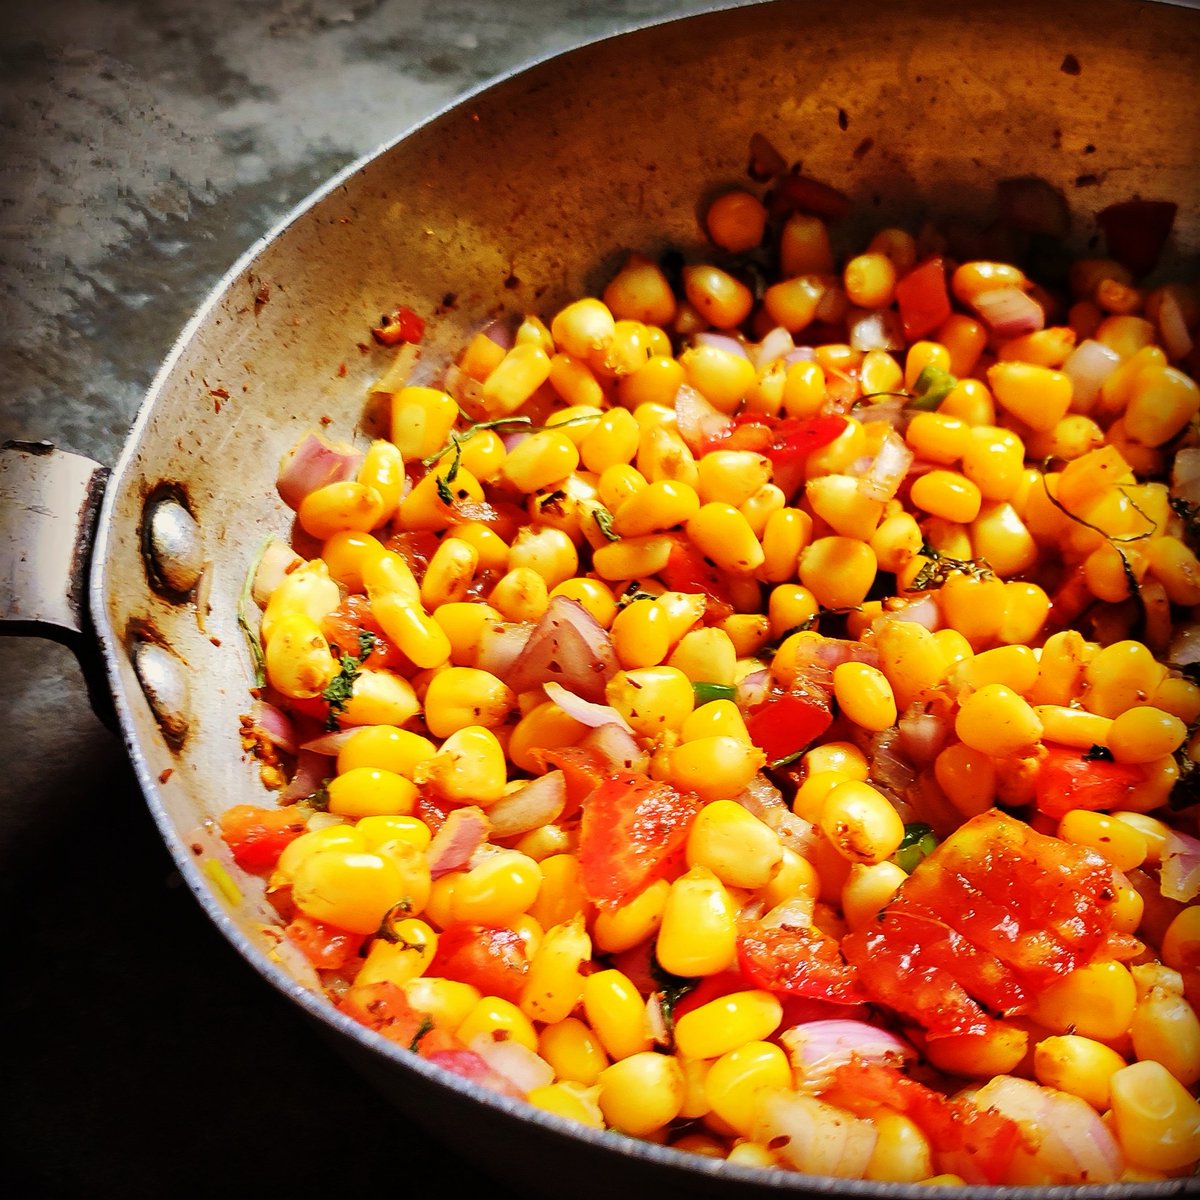 Saturday's Special - 'Crispy Veg Corn' 😋

Cooking is truly an act of love...Come here and enjoy today's act of love with me.
.
.
#cornsnake #breastfeeding #cookingwithlove #cheflife🔪 #foodiegram #morningvibes 

@EatingWell
@CookingLight
@cookingfever @IndianFoodMag ❤️